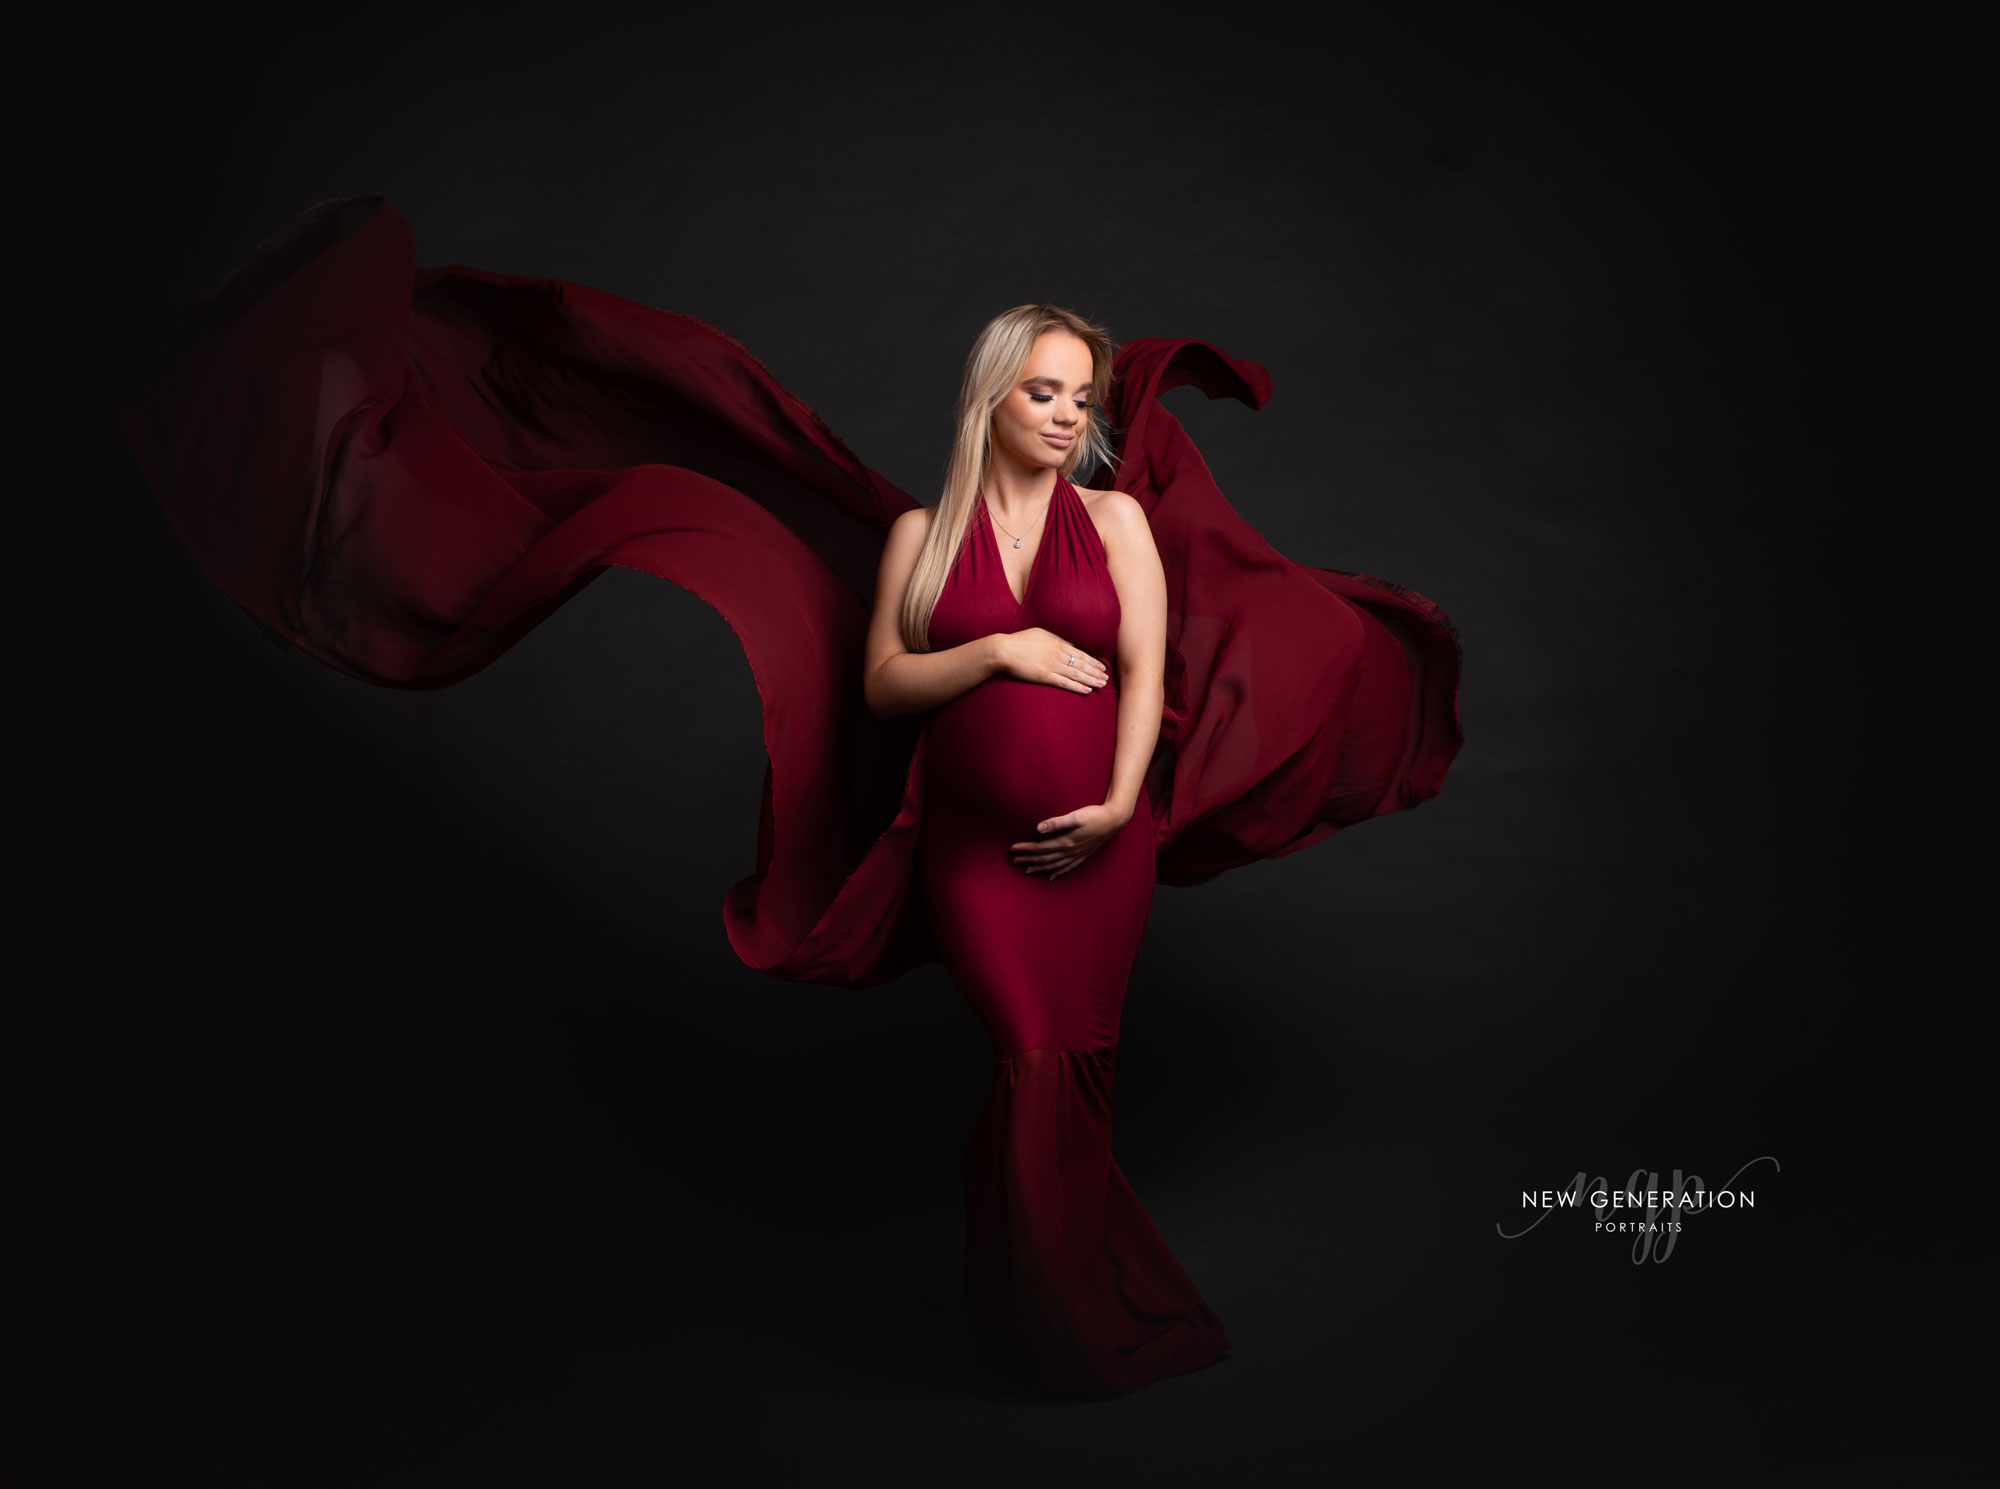 Stunning mum to be in one of our studio gowns. Photographed on a dark background. Captured by New Generation Portraits